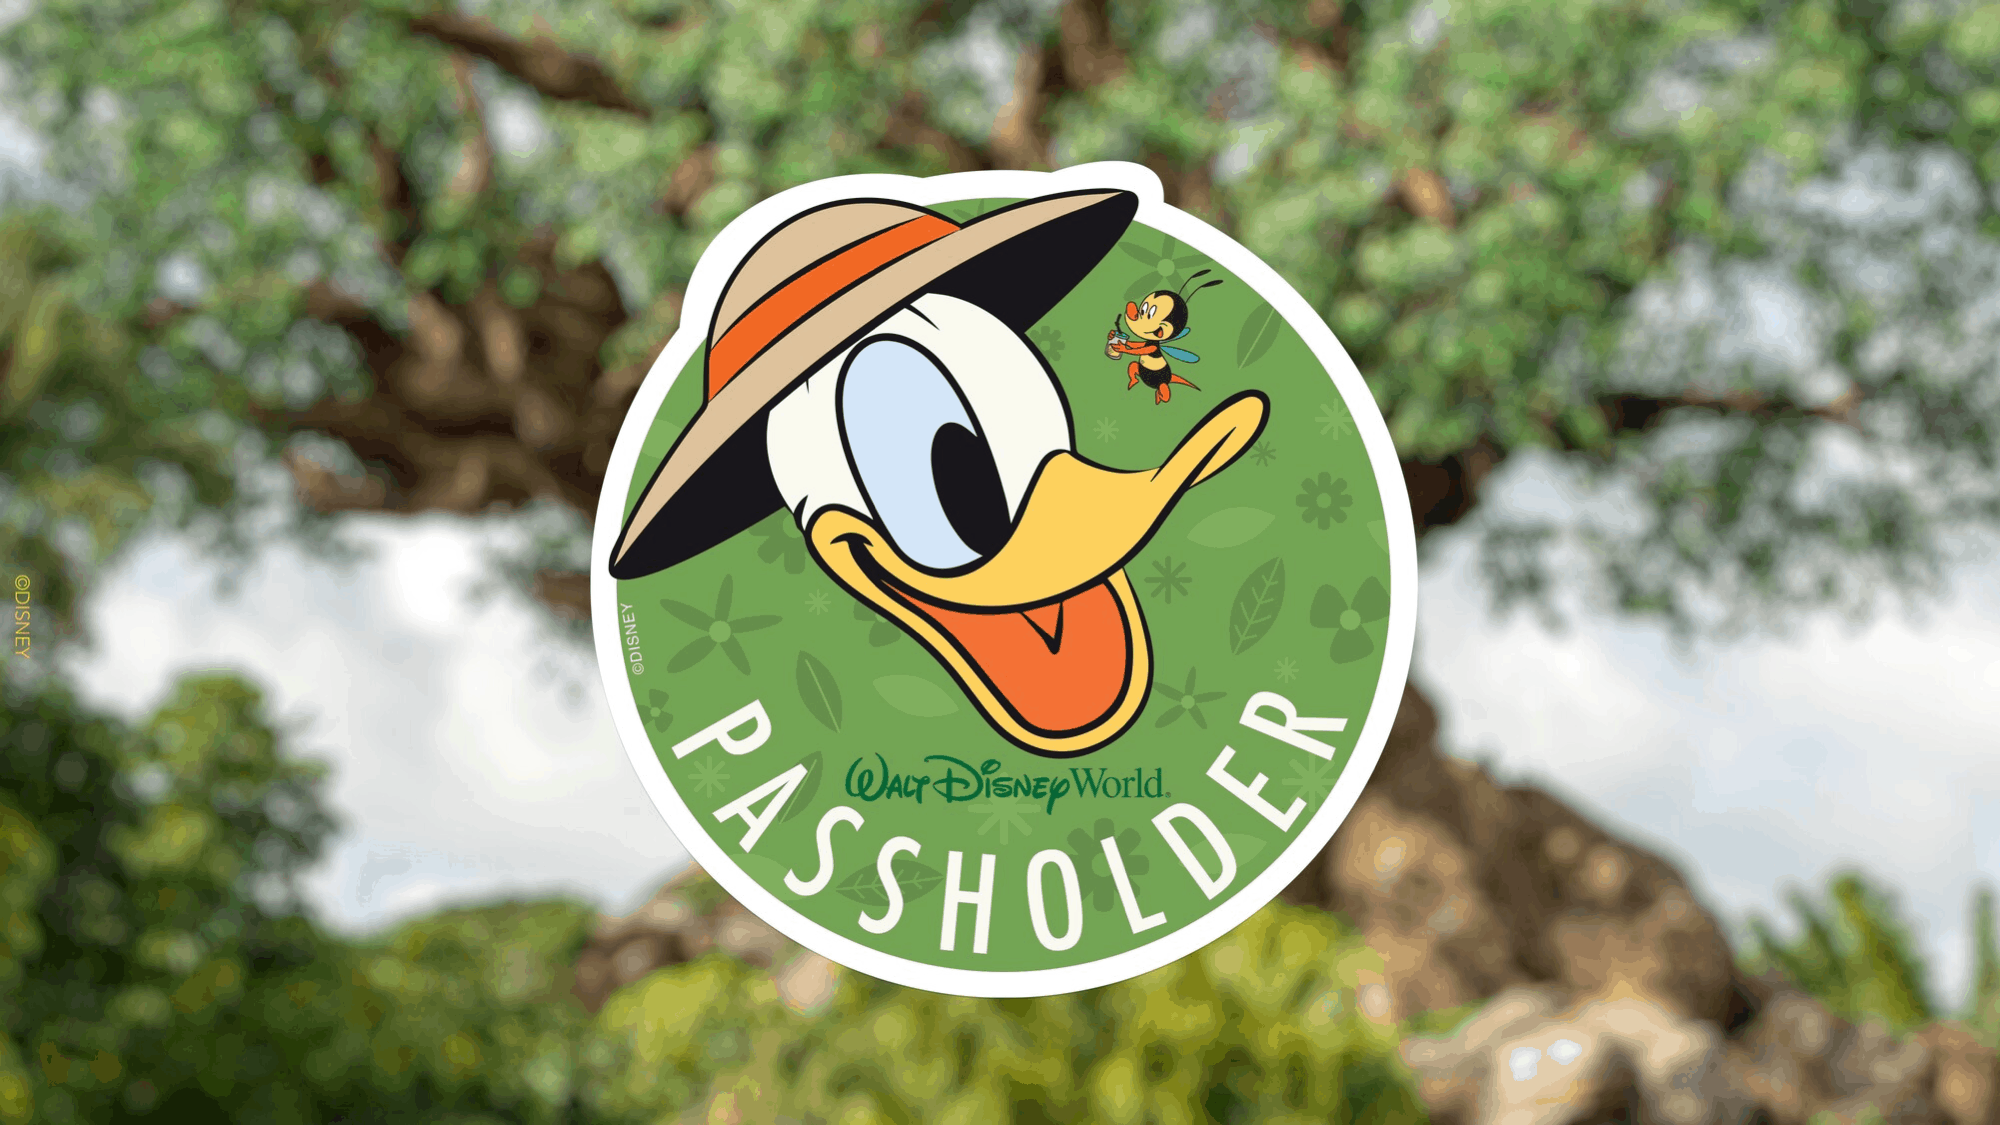 Exclusive Annual Passholder Offerings Coming To Animal Kingdom